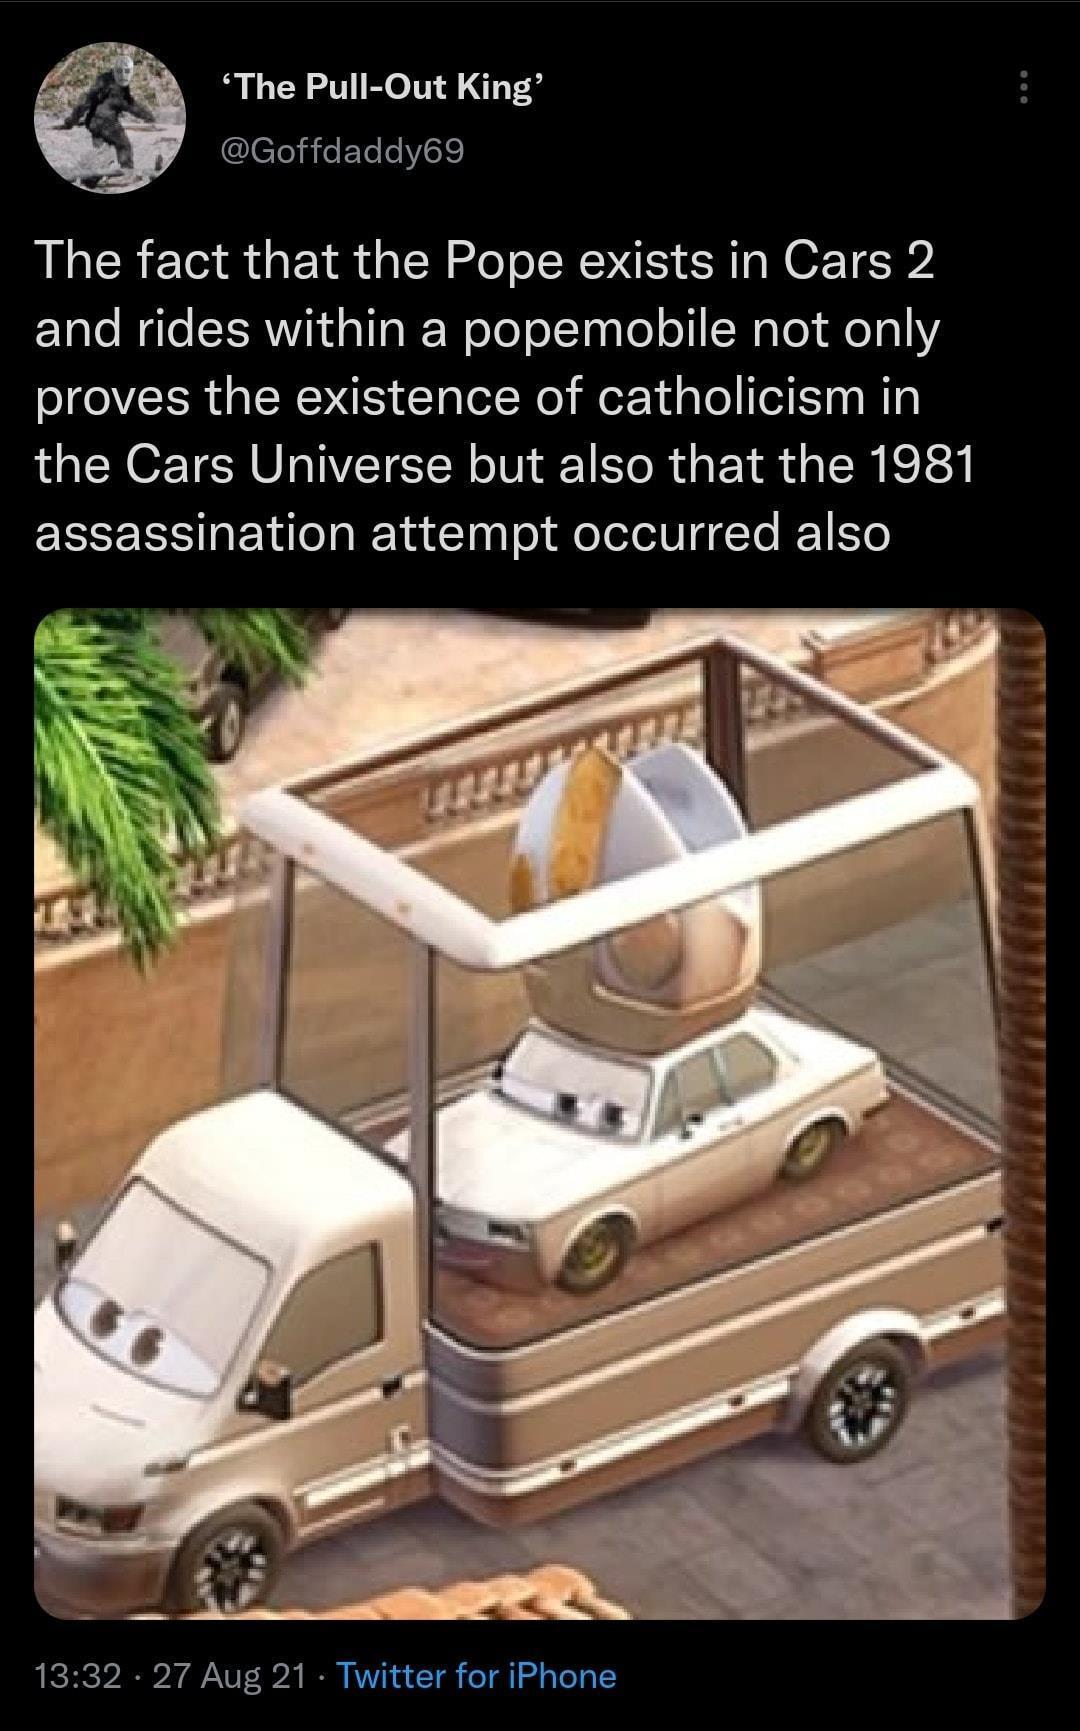 funny memes and random pics - cars 2 pope - 'The PullOut King' The fact that the Pope exists in Cars 2 and rides within a popemobile not only proves the existence of catholicism in the Cars Universe but also that the 1981 assassination attempt occurred al